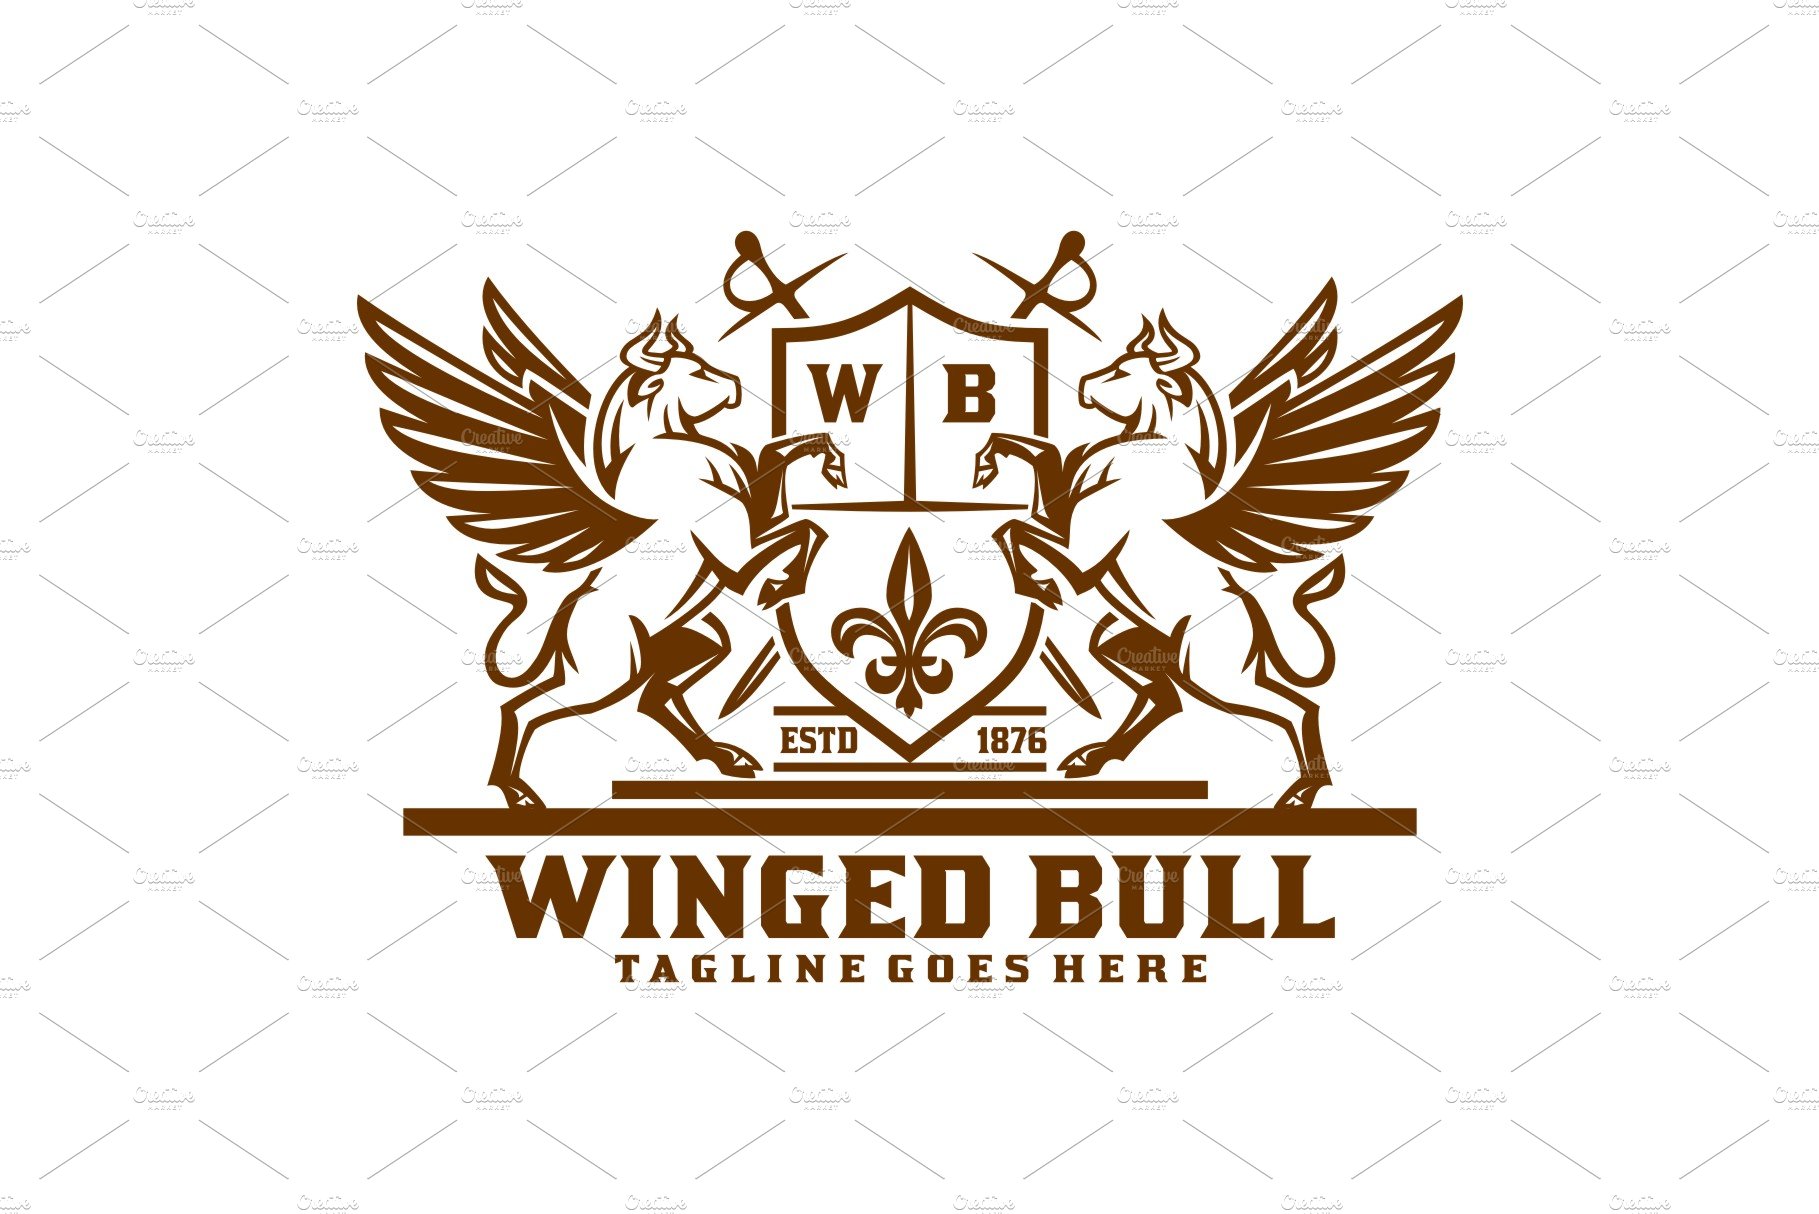 Winged Bull cover image.